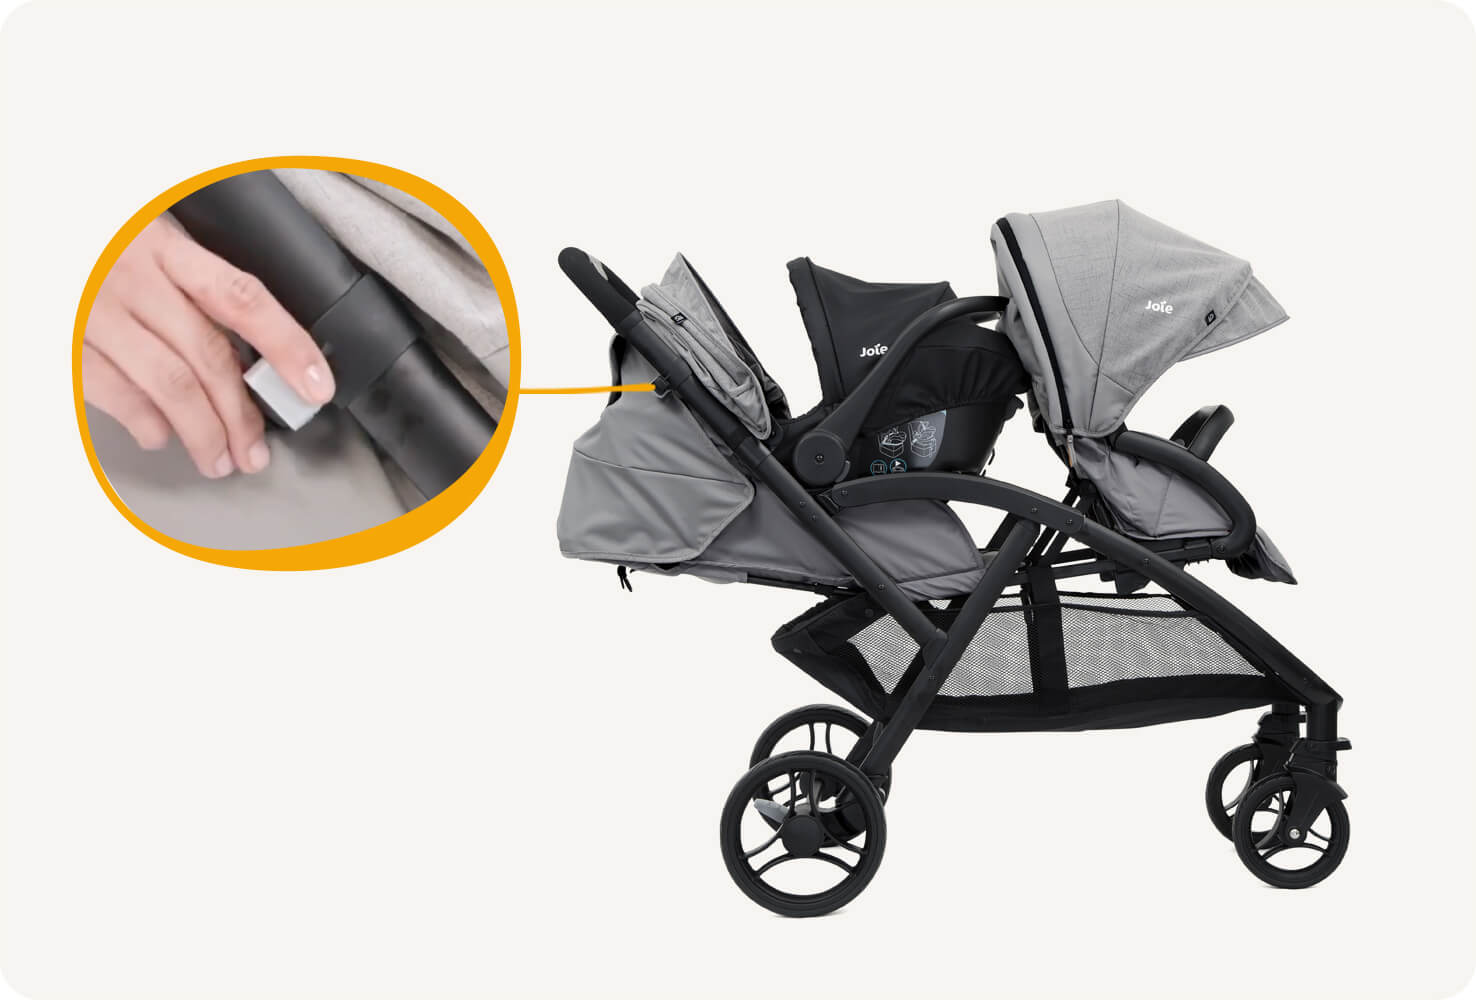 Joie evalite duo double buggy in gray in profile with an infant carrier attached and a close-up panel of the attachment lock.